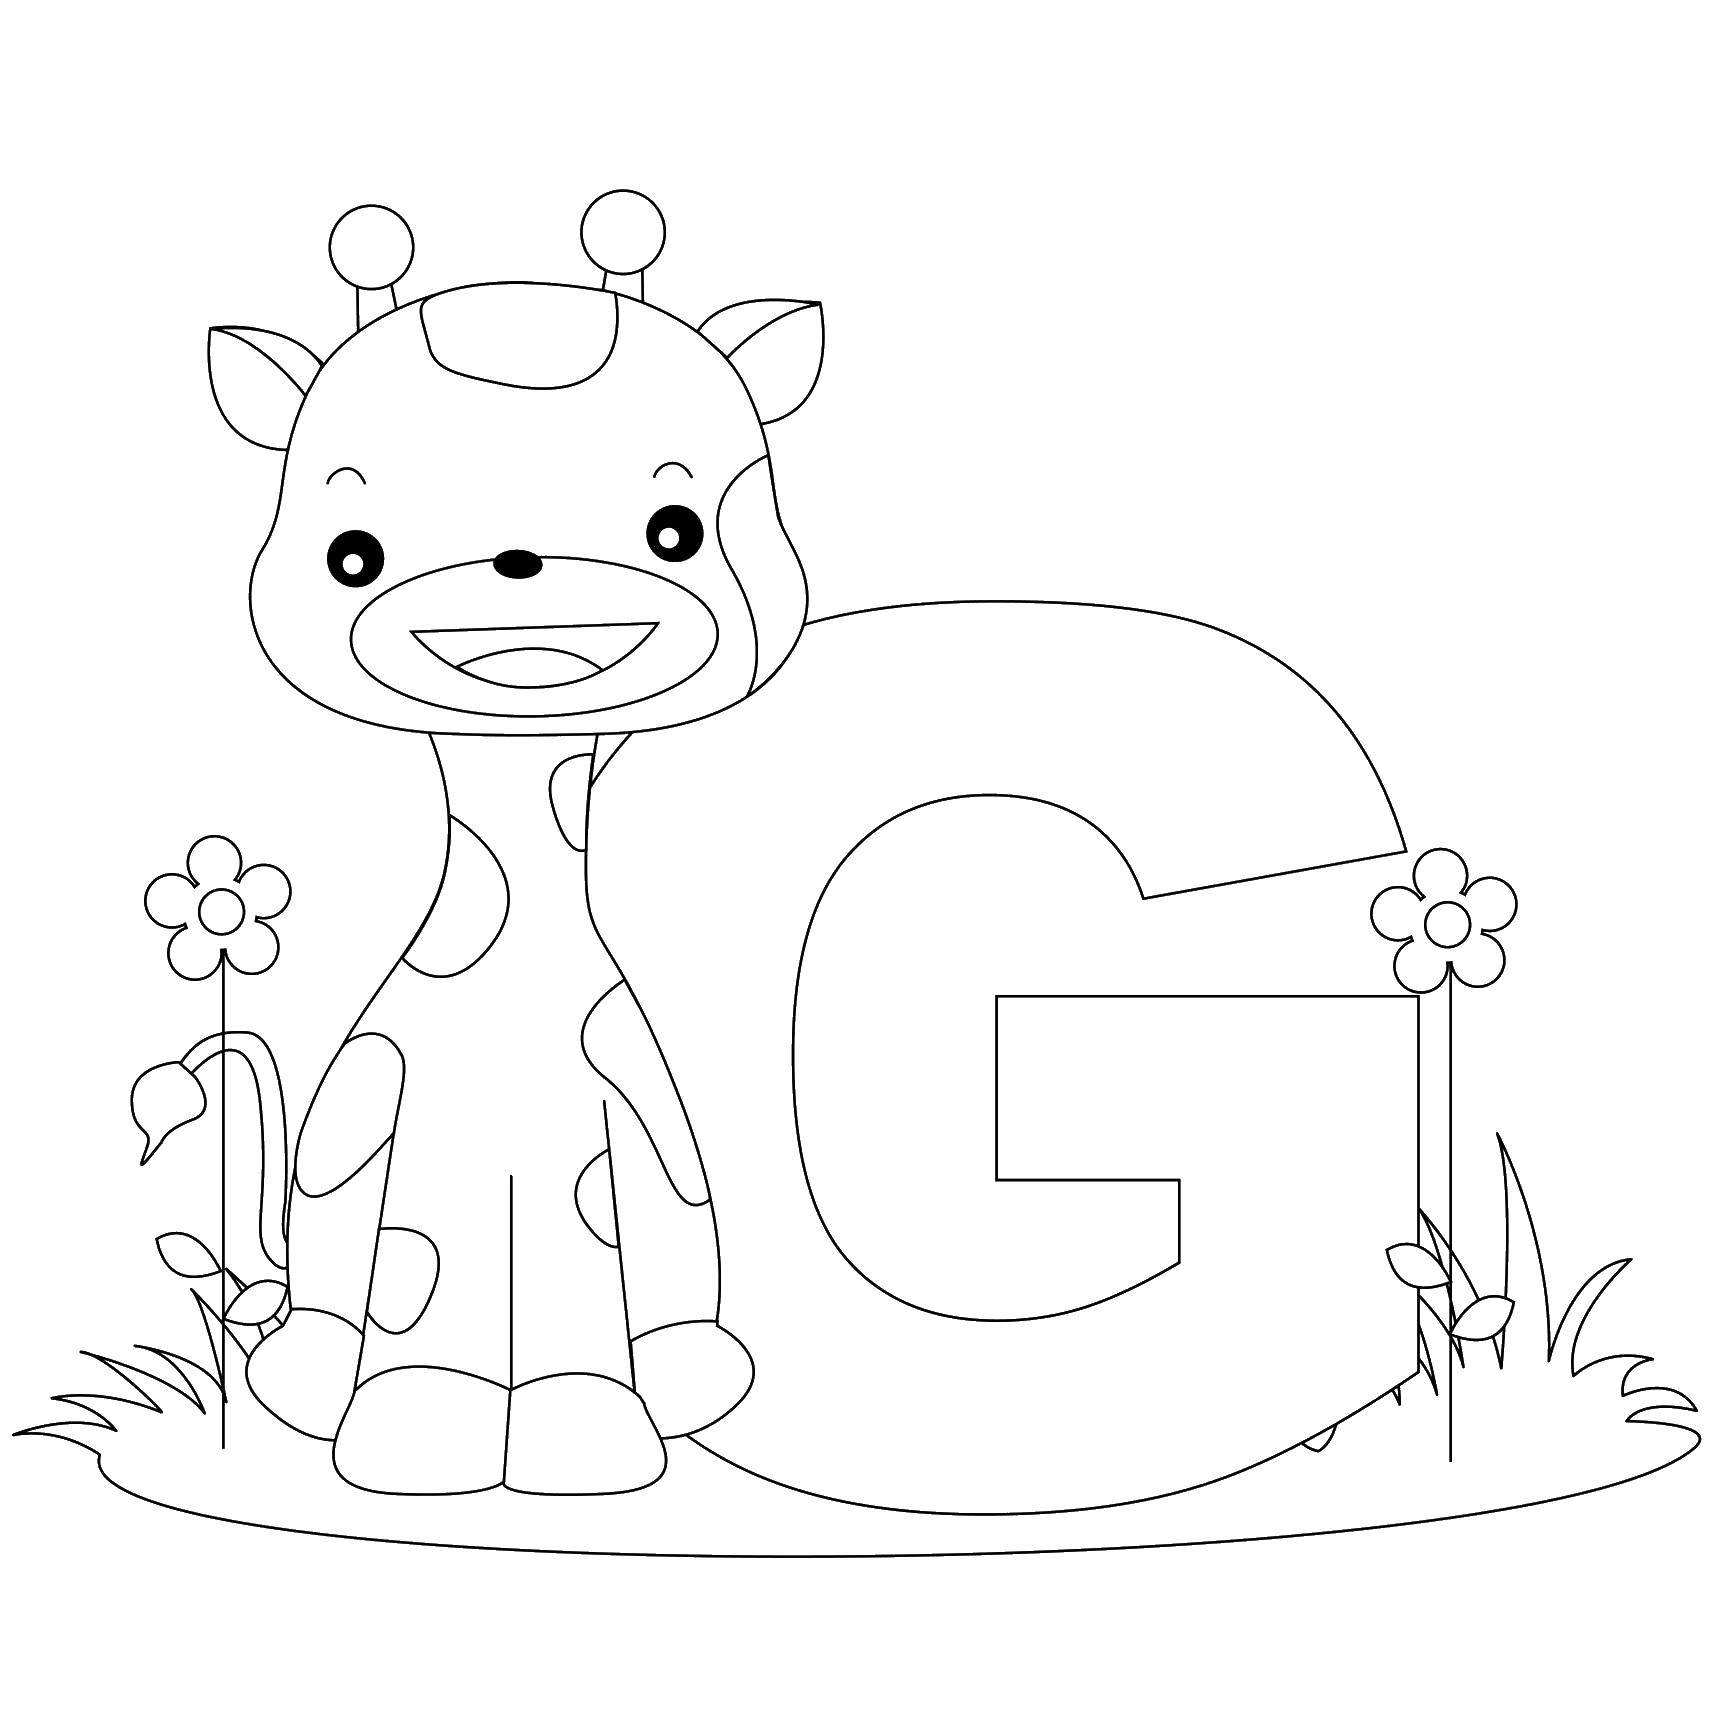 Coloring Giraffe. Category English. Tags:  the English alphabet , letters, .......